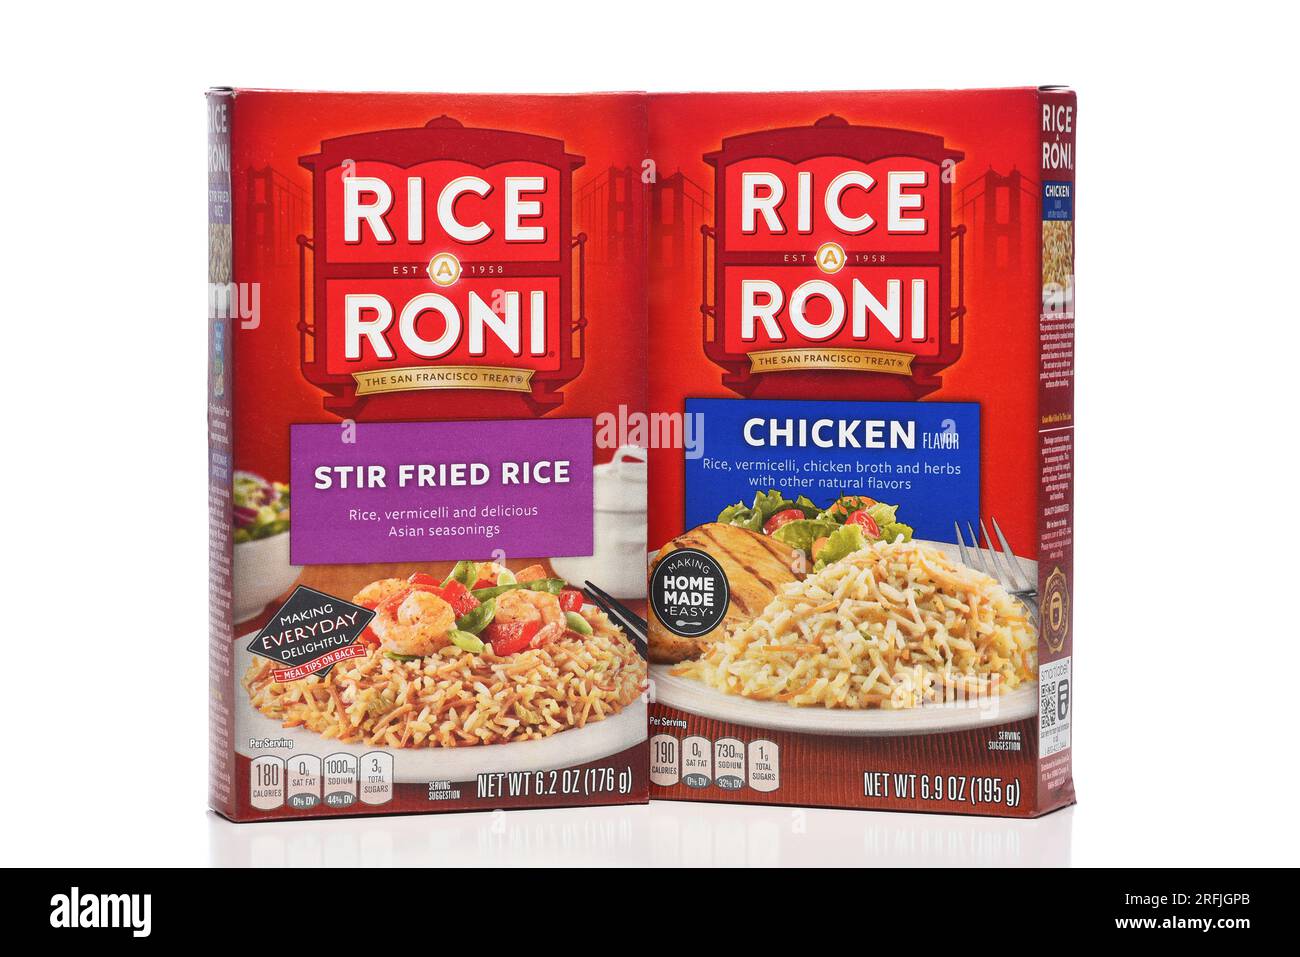 IRVINE, CALIFORNIA - 3 AUG 2023: Two boxes of Rice-a-Roni, Stir Fried Rice and Chicken Flavor. Stock Photo